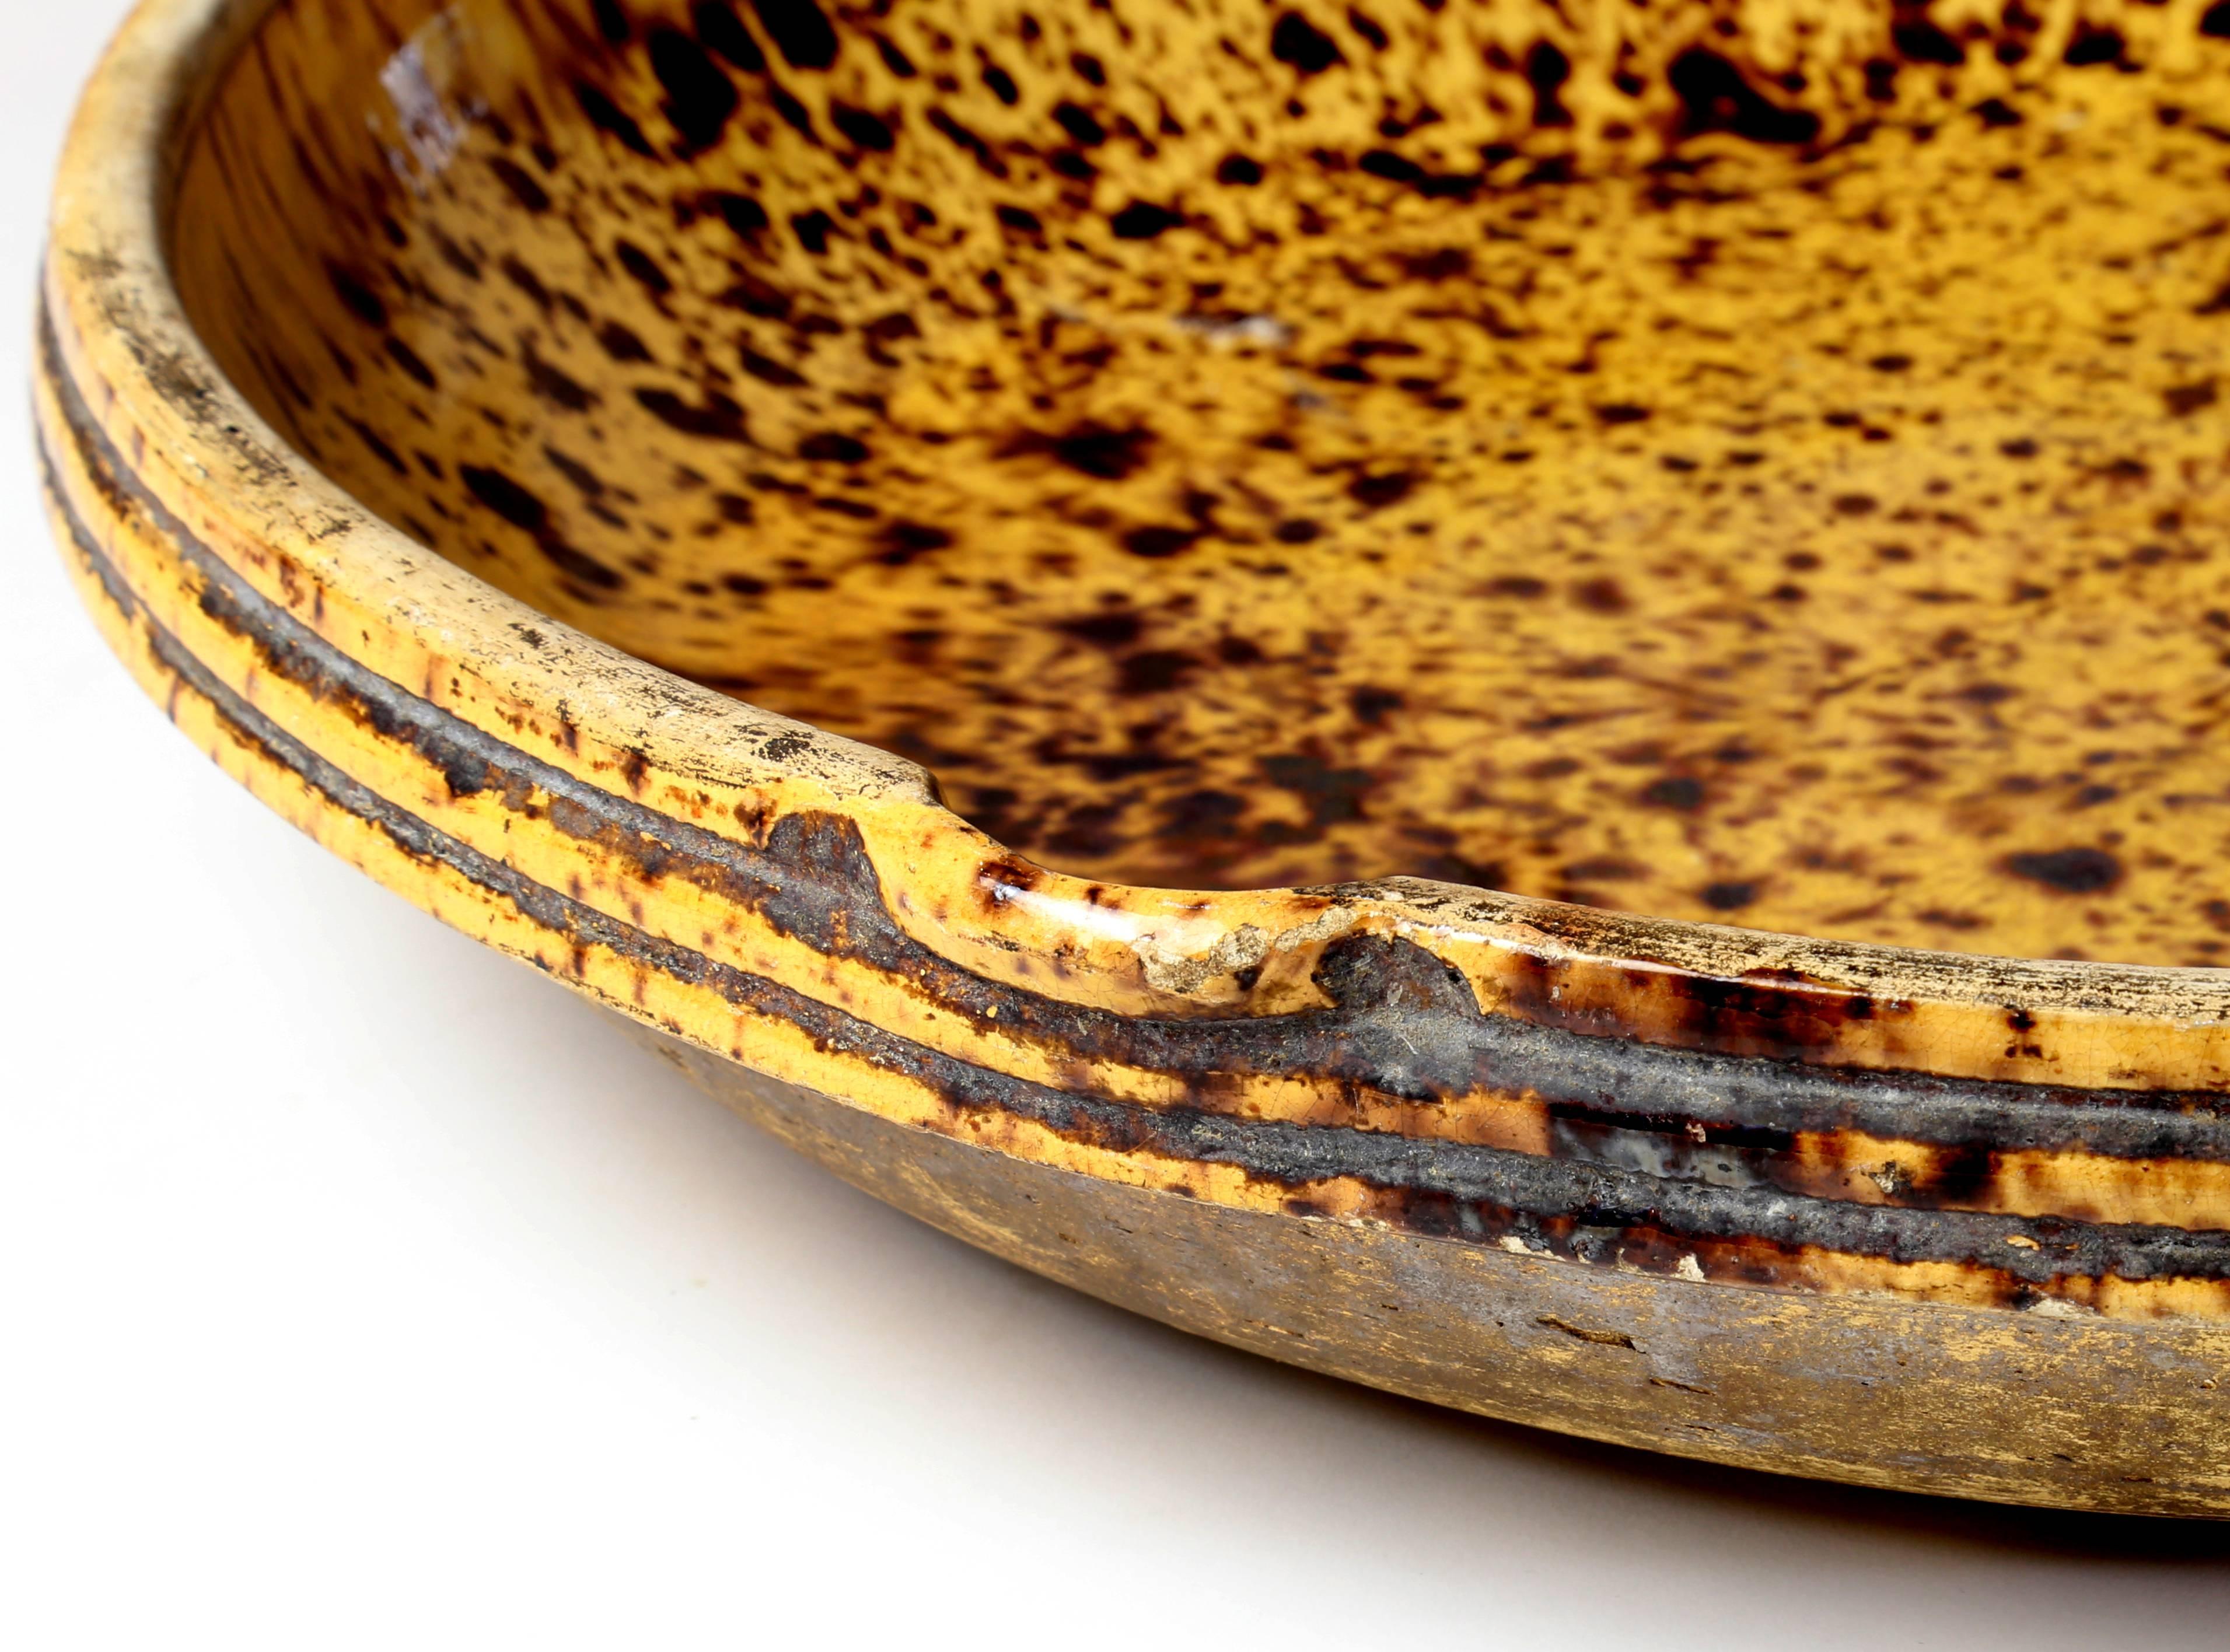 A large round antique terracotta cheese draining bowl with a gold and brown speckled glaze.